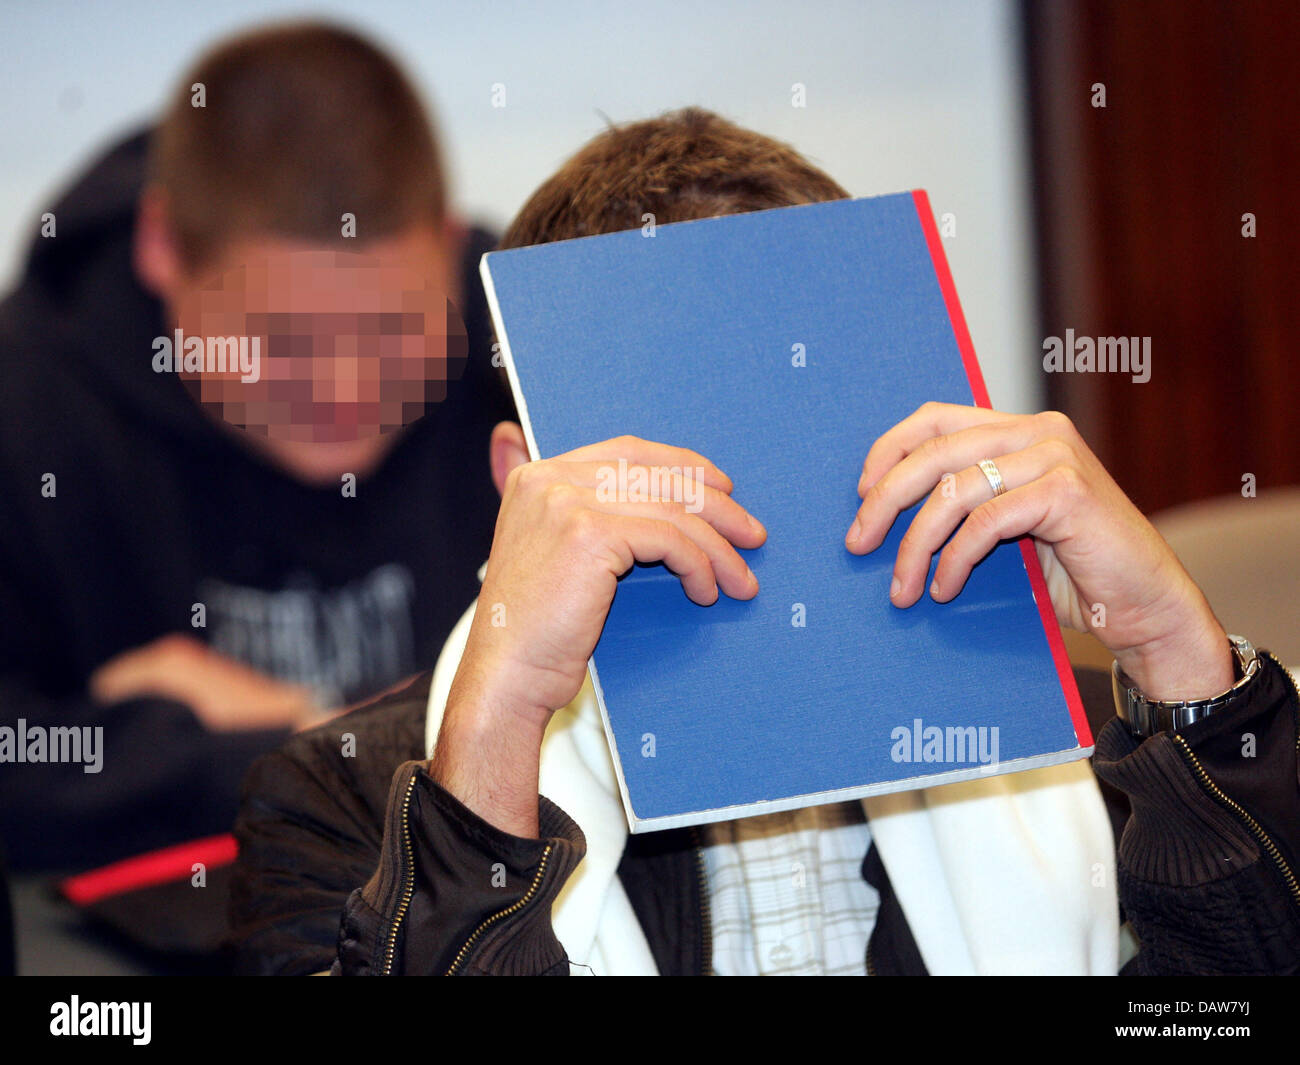 Defendant Lars K. (R) covers his face with a paper folder in the dock of District Court Magdeburg, Germany, Thursday, 08 March 2007. The prosecutor's office for the state of Saxony-Anhalt has filed charges against seven men accused of instigating the burning of books which included the famous Diary of Anne Frank. It is likely that the prosecutors announce today the judgement. Durin Stock Photo